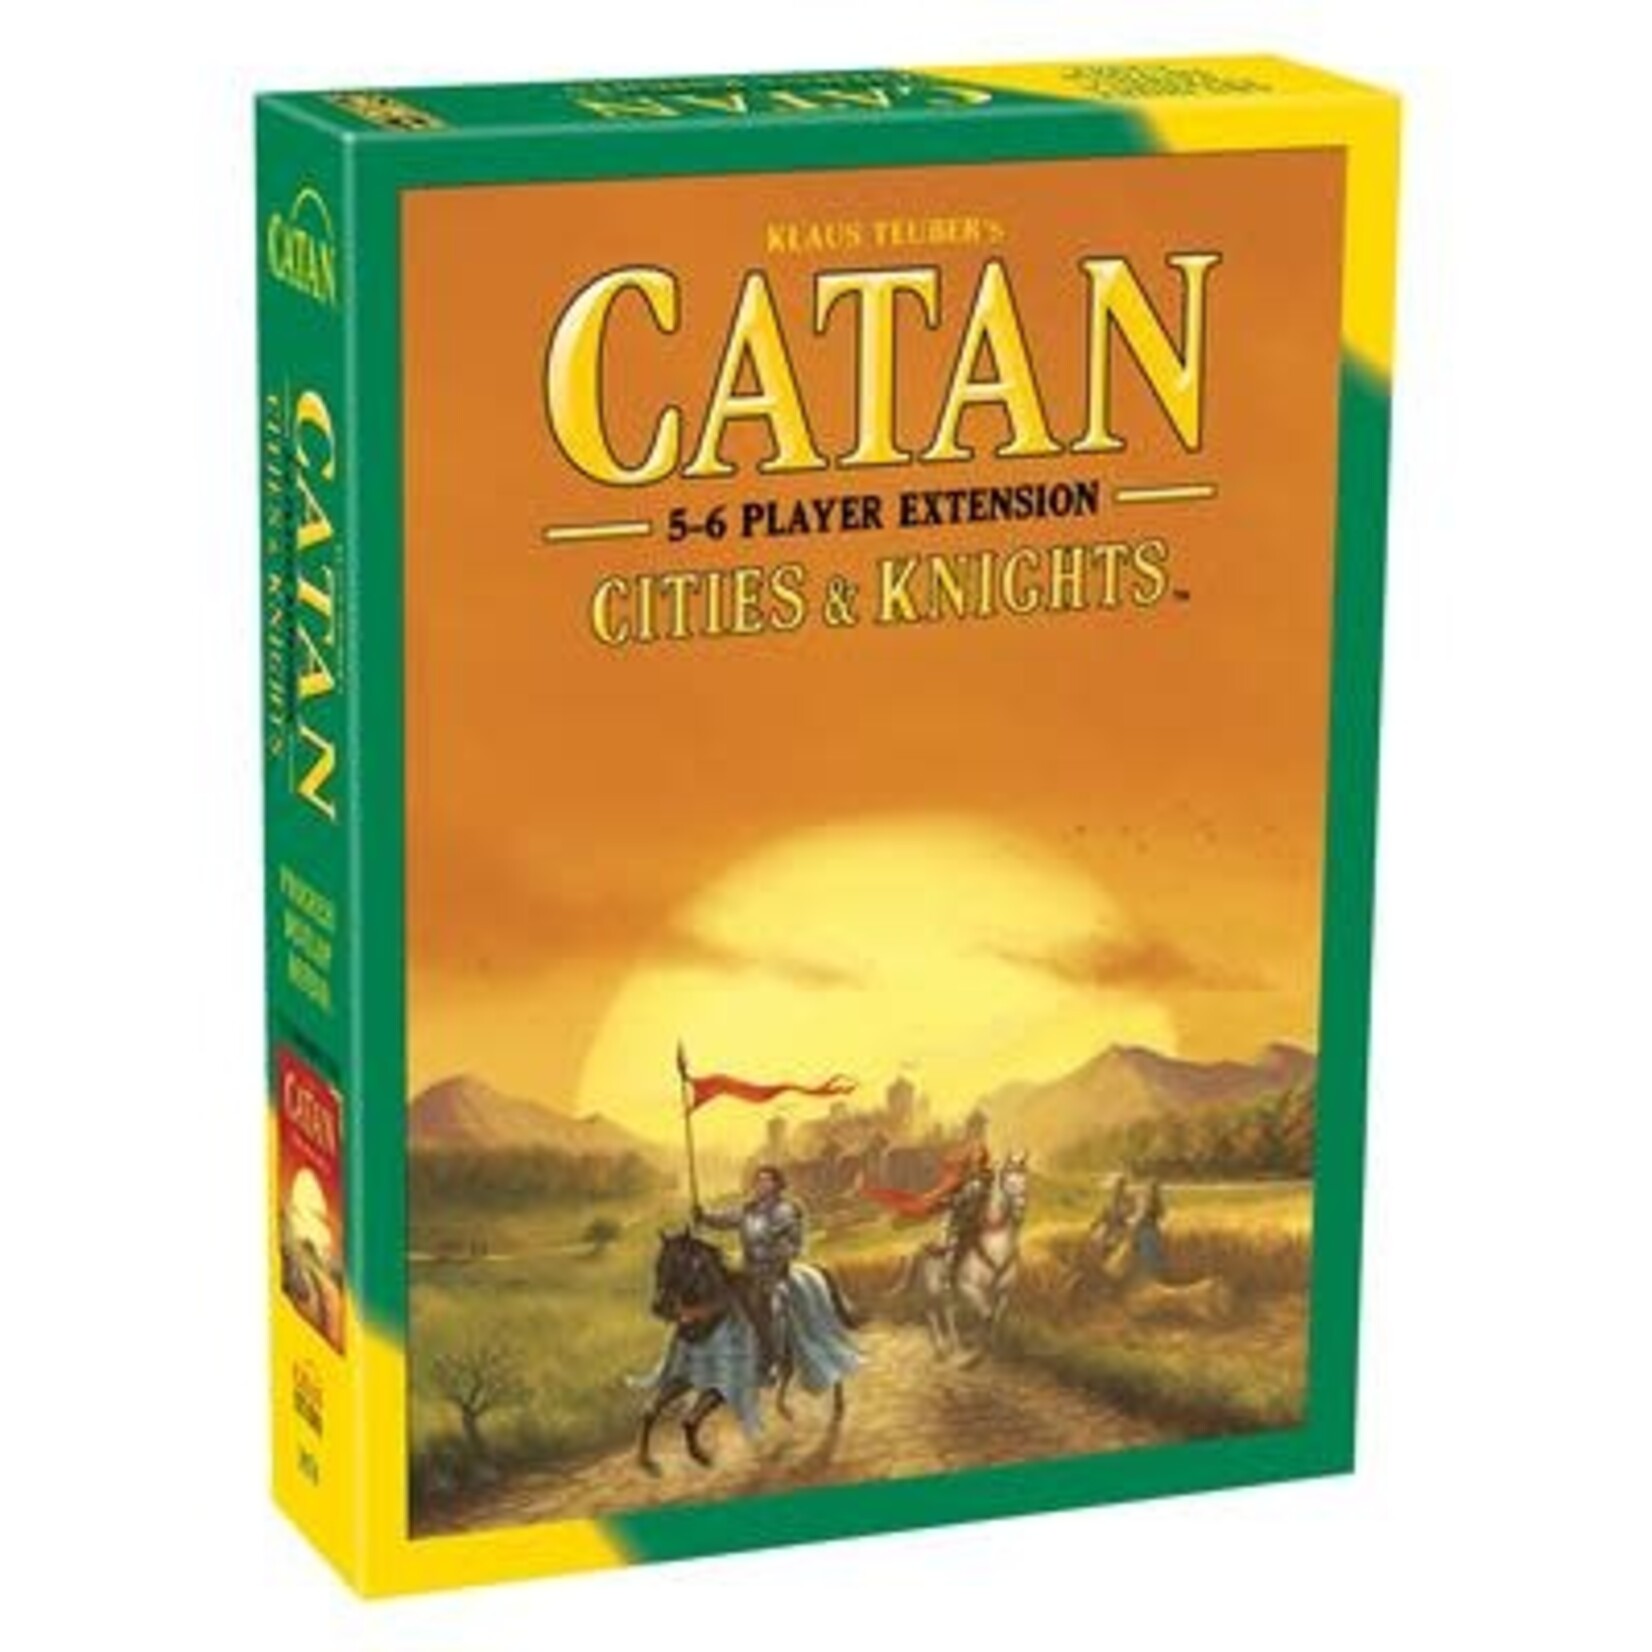 Catan Studio Catan - Cities & Knights 5-6 Player Expansion